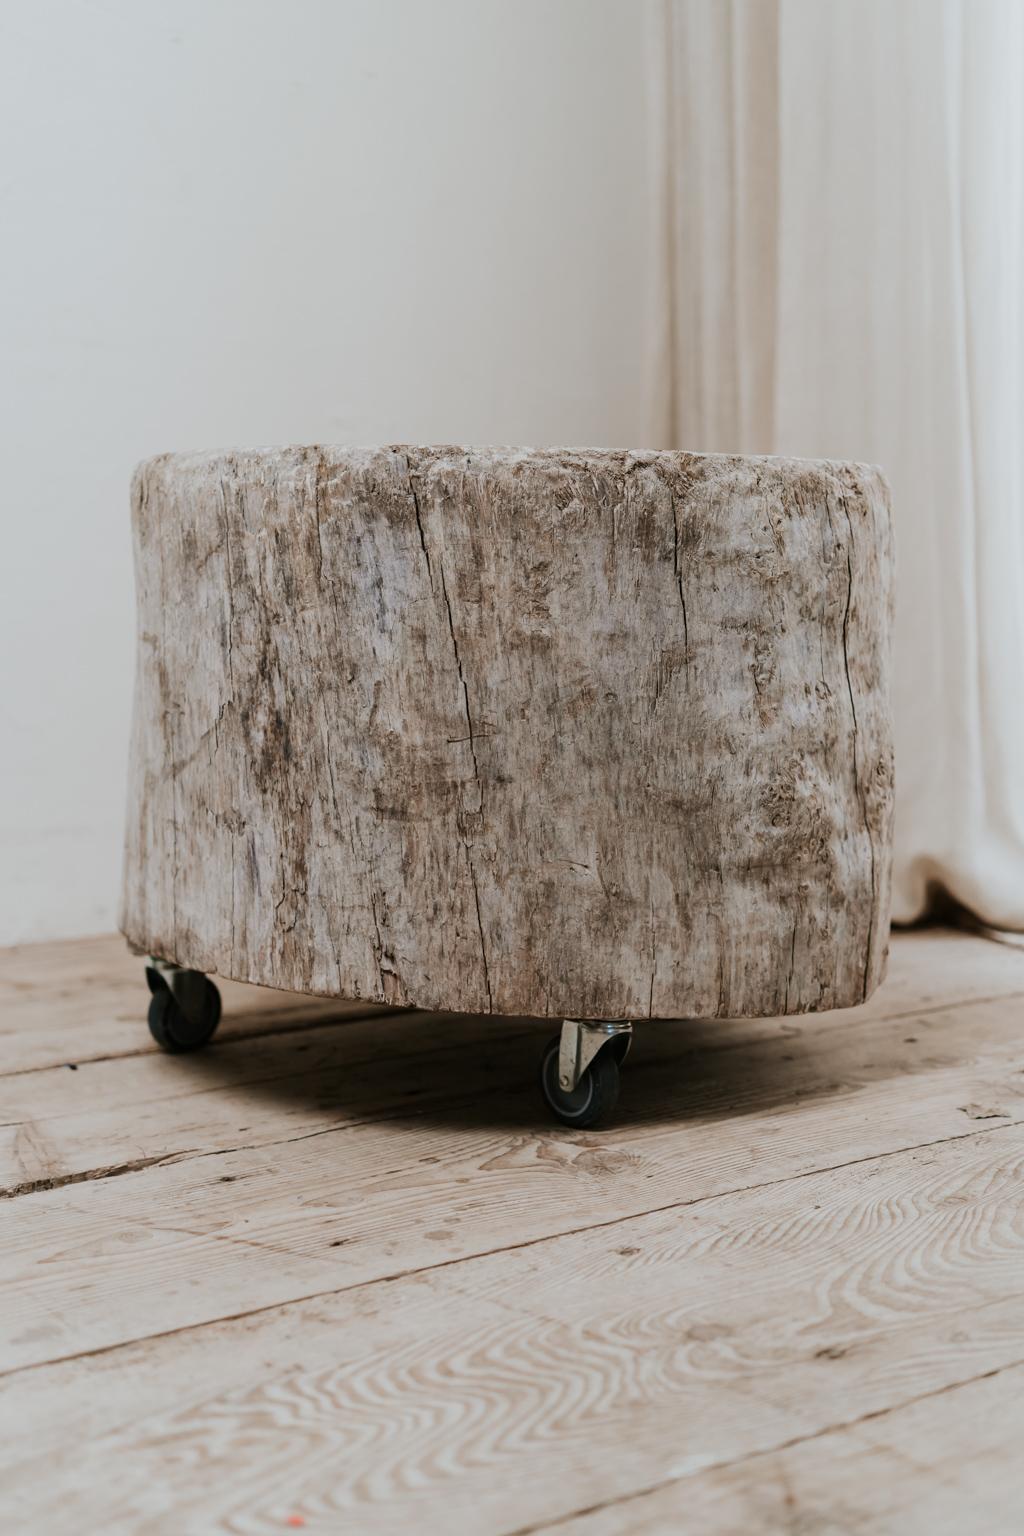 Love these treetrunk tables, showing here a big one, but more available,
we have put these stumps on wheels so very easy to move in your interior,
dimensions of this very big one 54 cm high x 70 cm diameter.